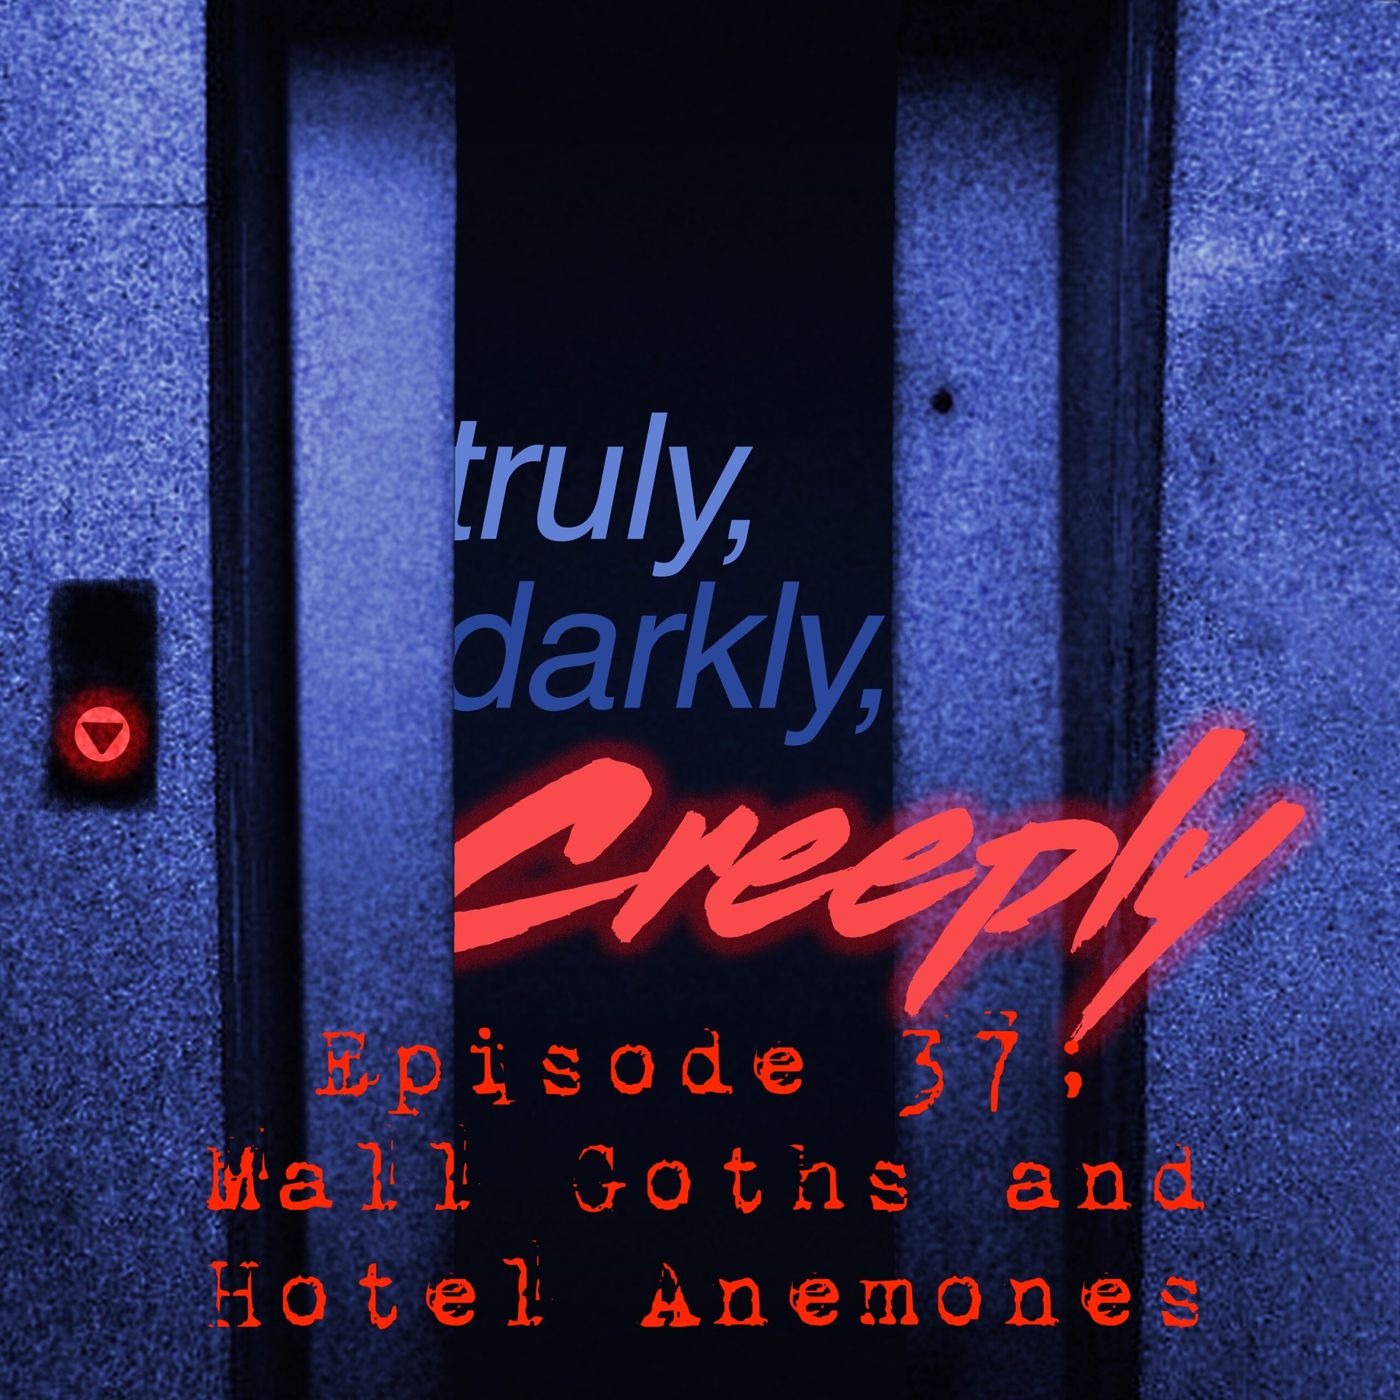 Mall Goths and Hotel Anemones by Truly Darkly Creekly